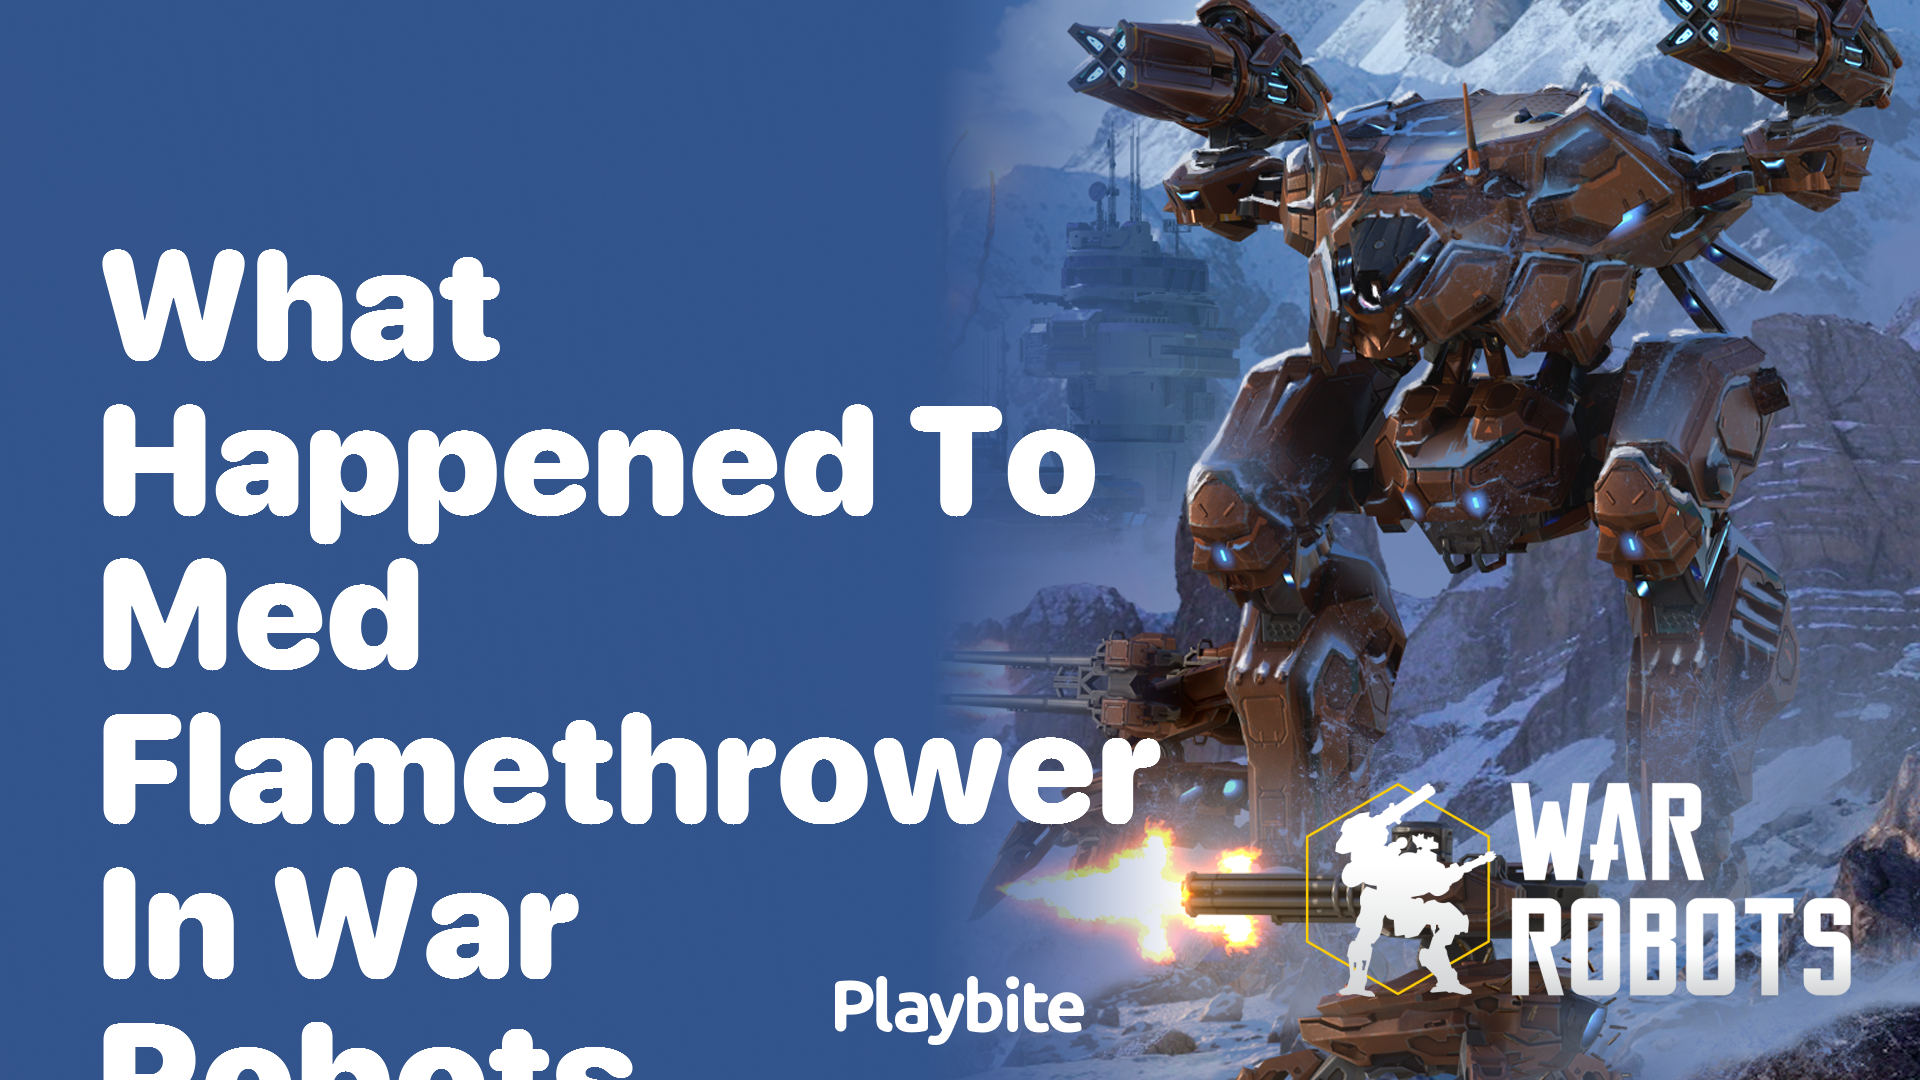 What Happened to the Med Flamethrower in War Robots?